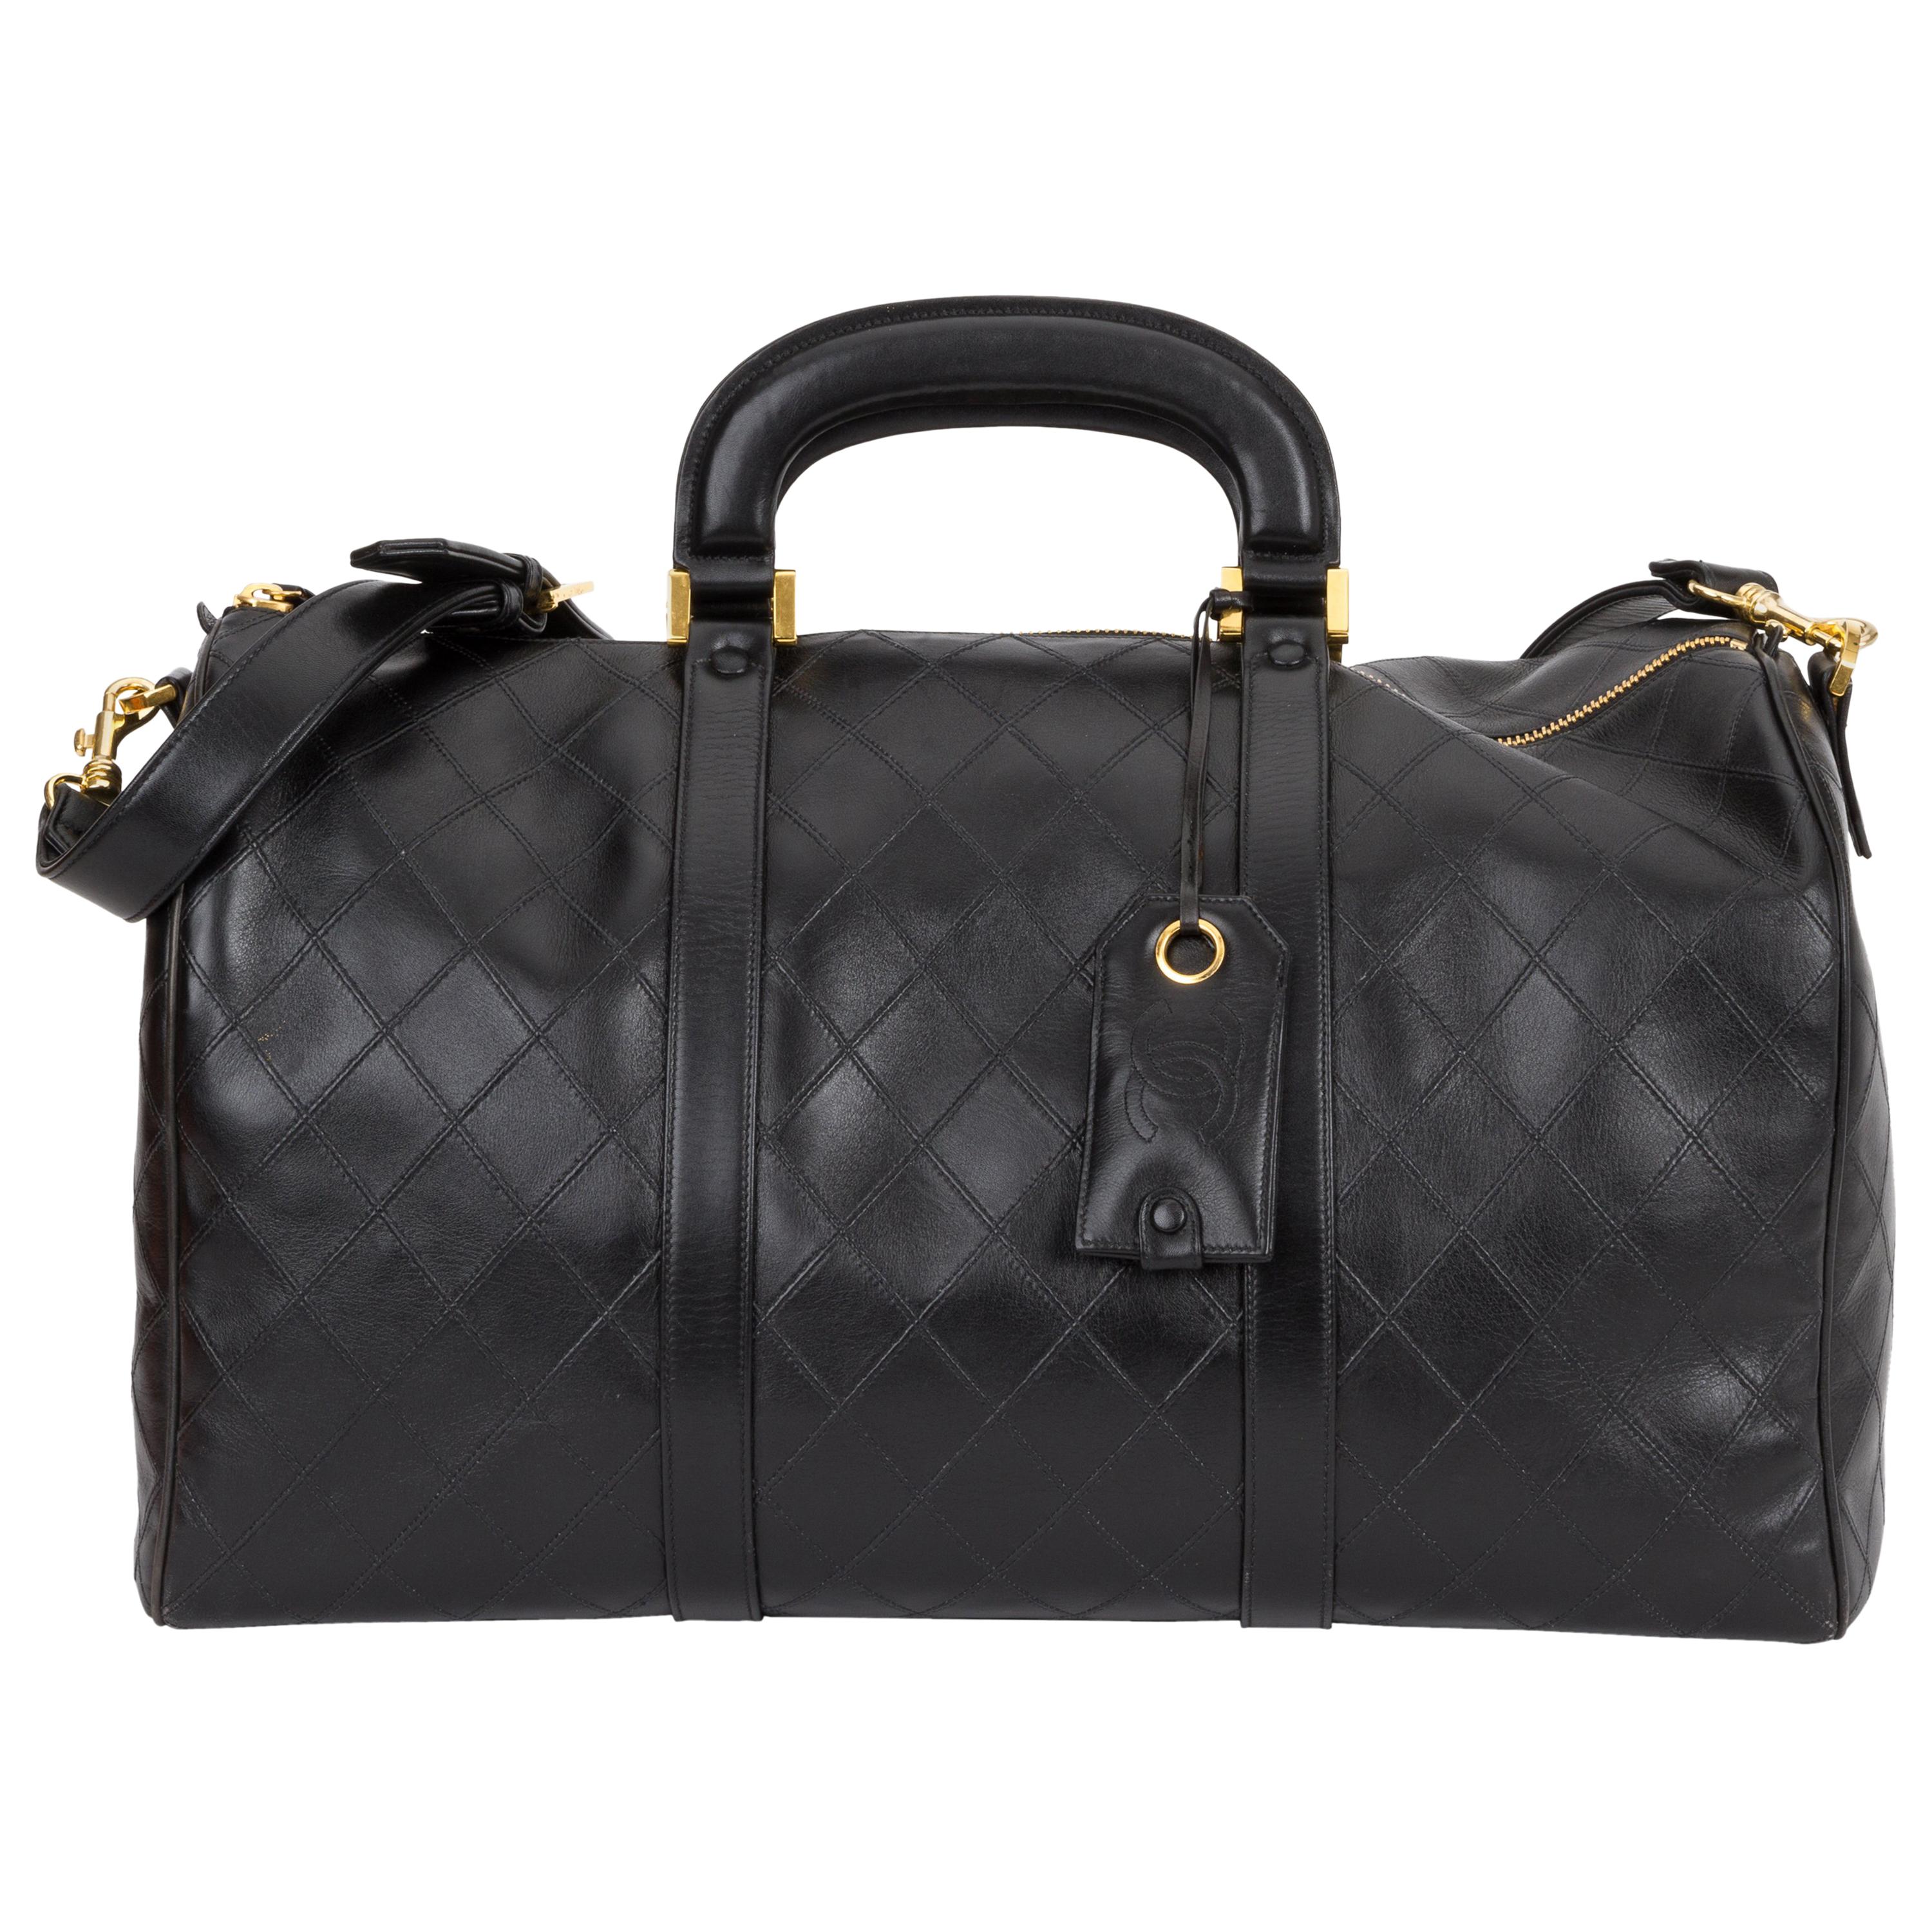 Chanel Rare Black Diamond Quilted Duffle Travel Bag